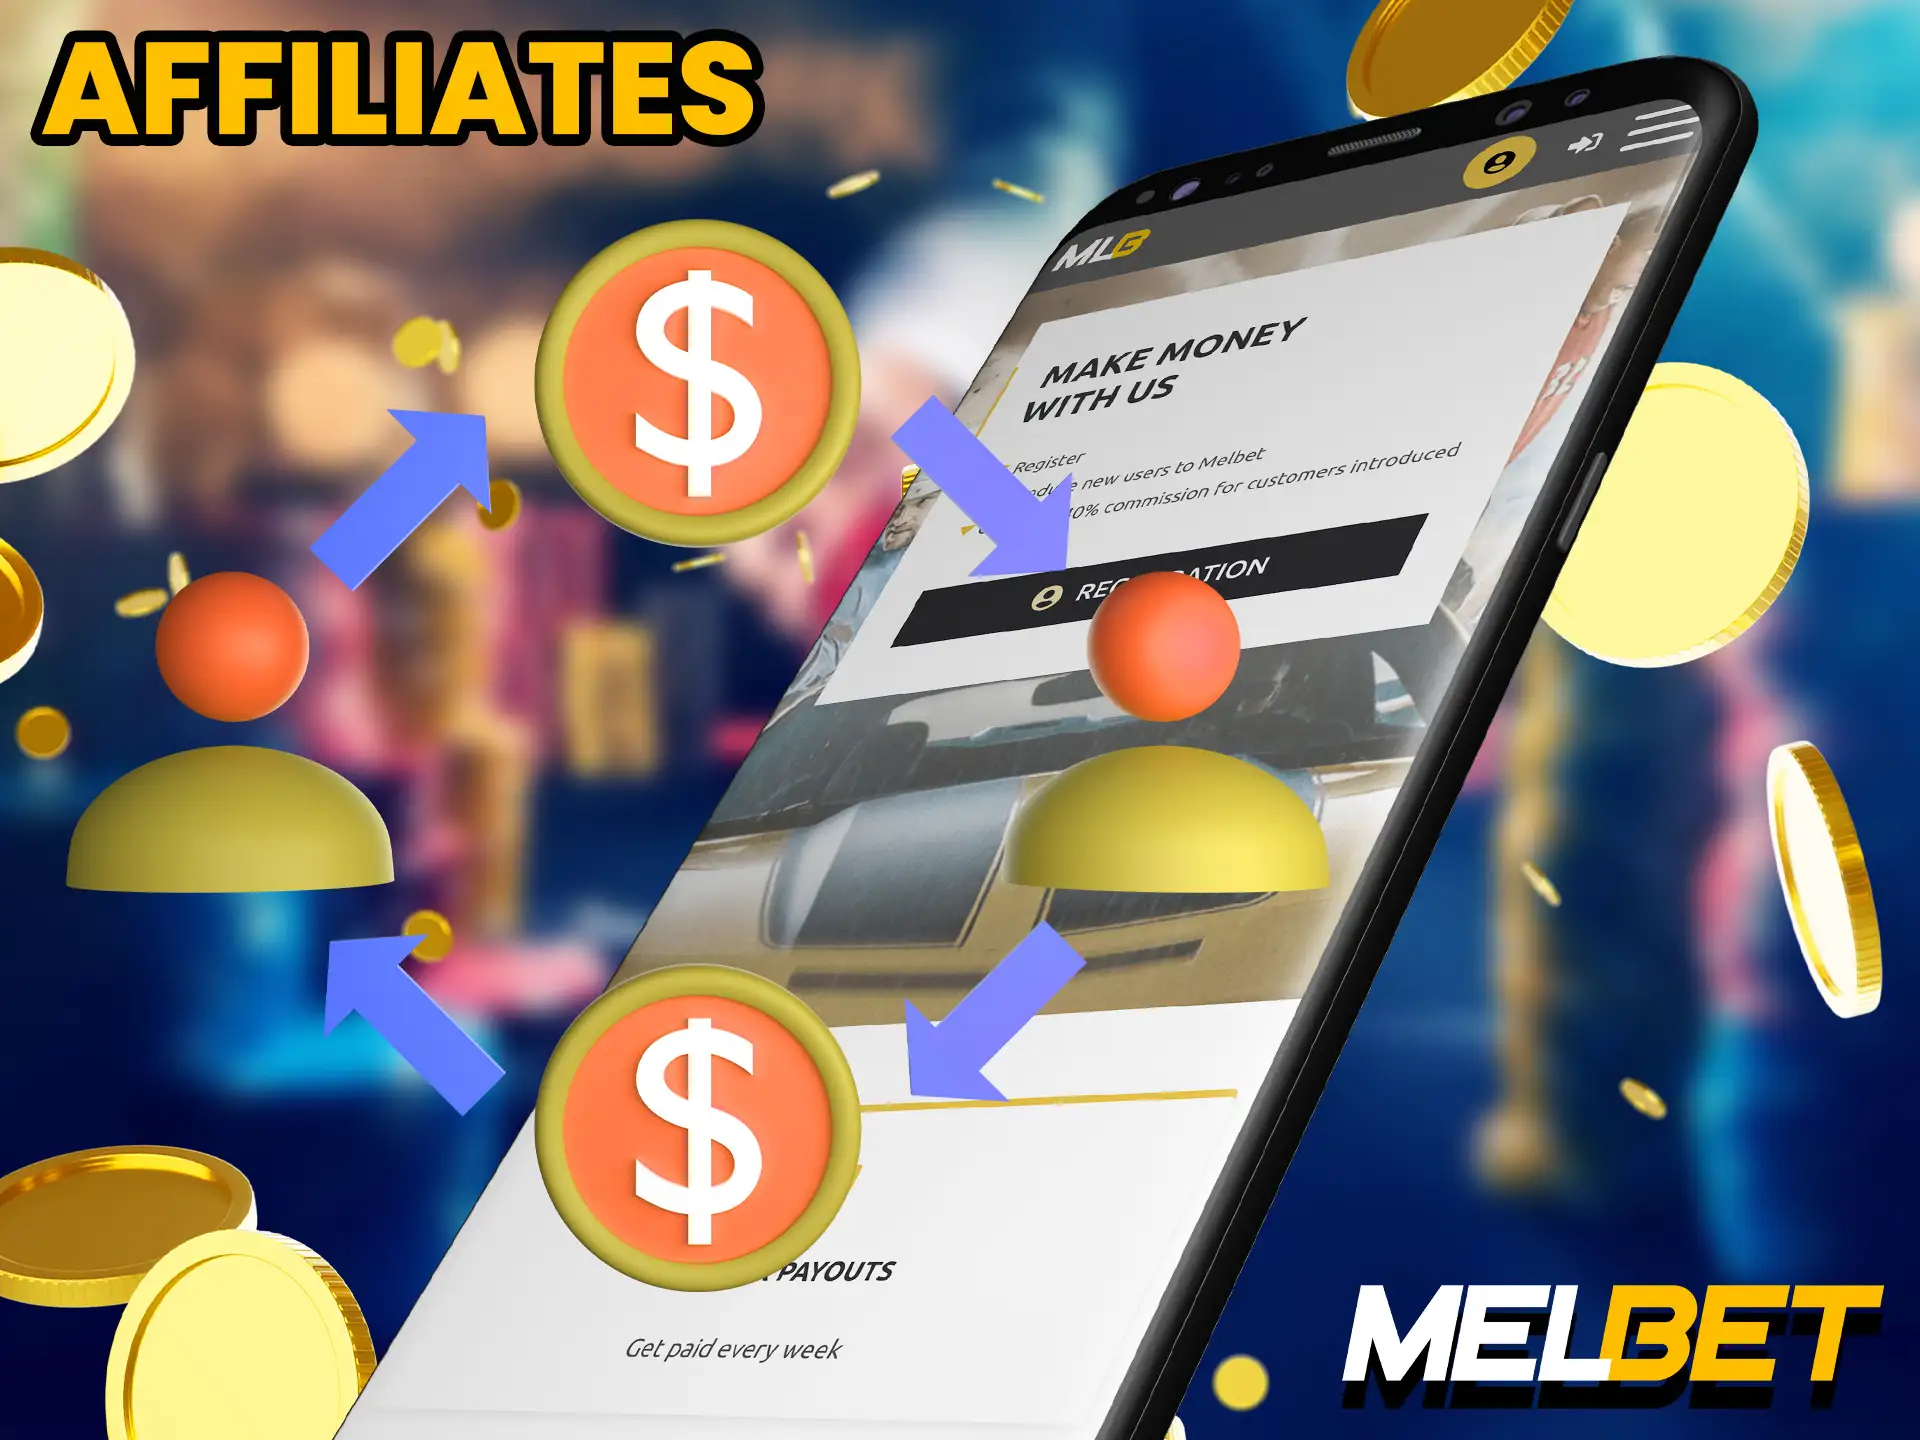 Get commissions for bringing new players to the Melbet website.